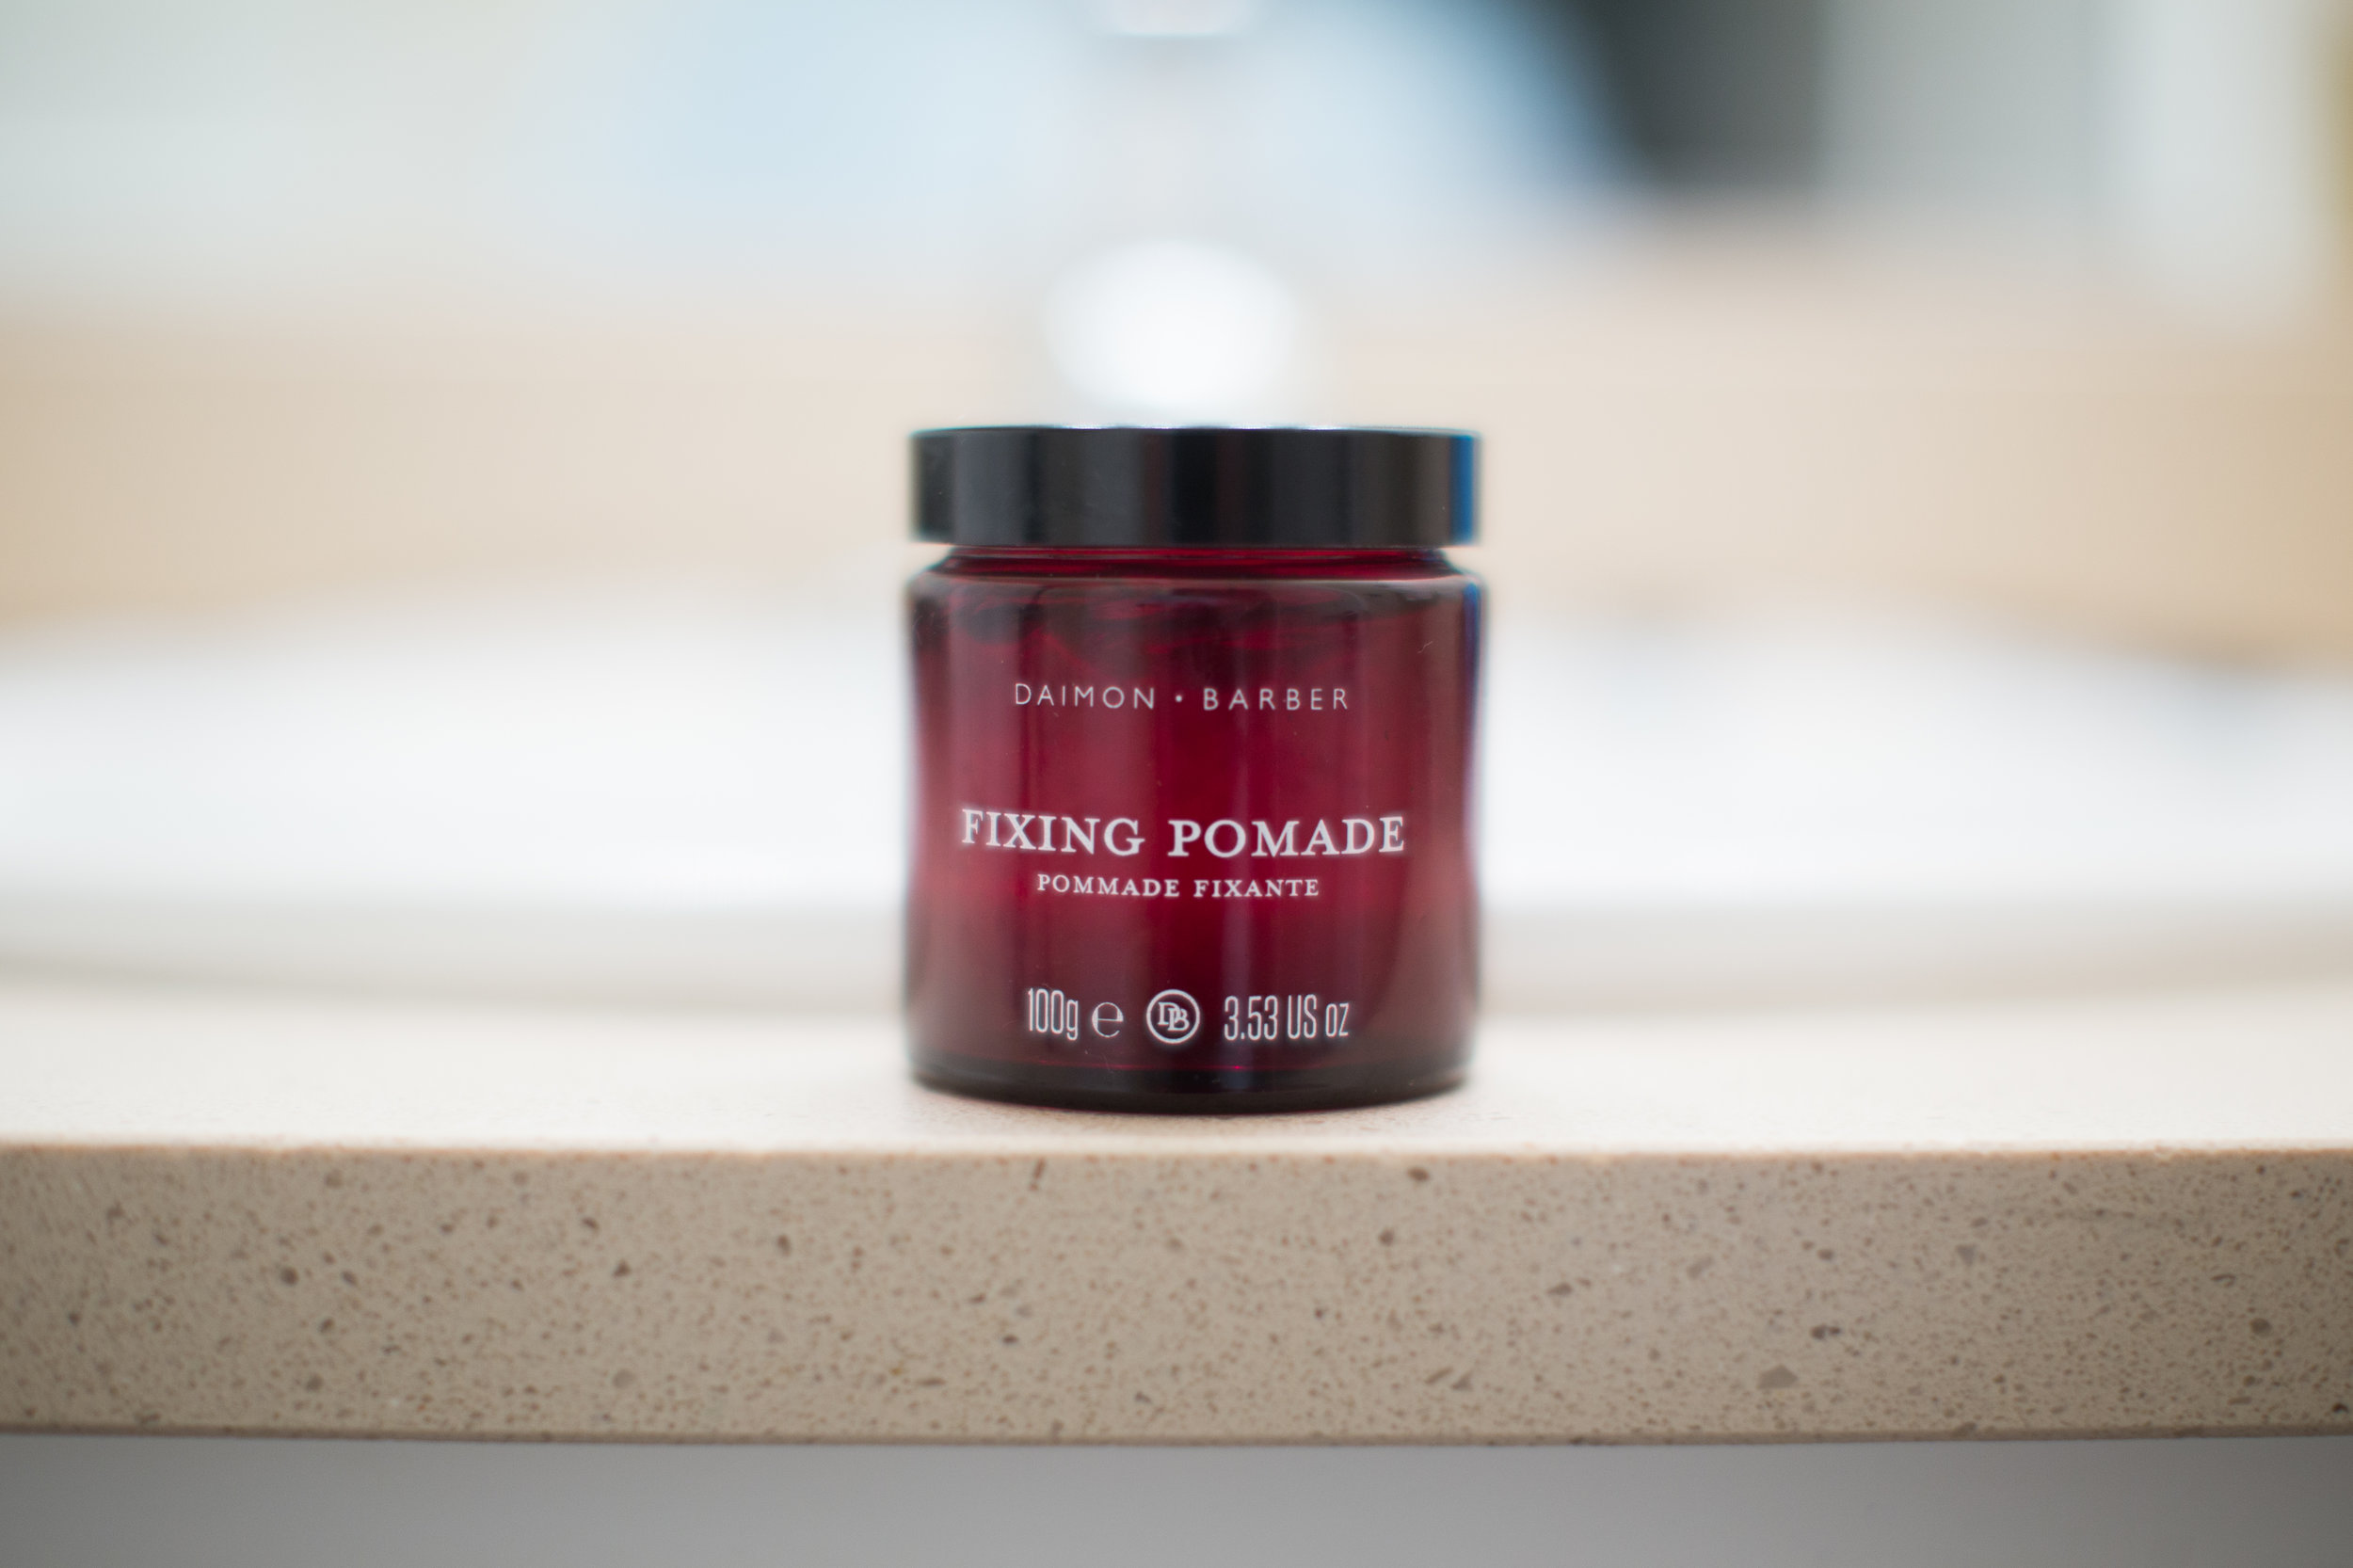 daimon barber texture clay review